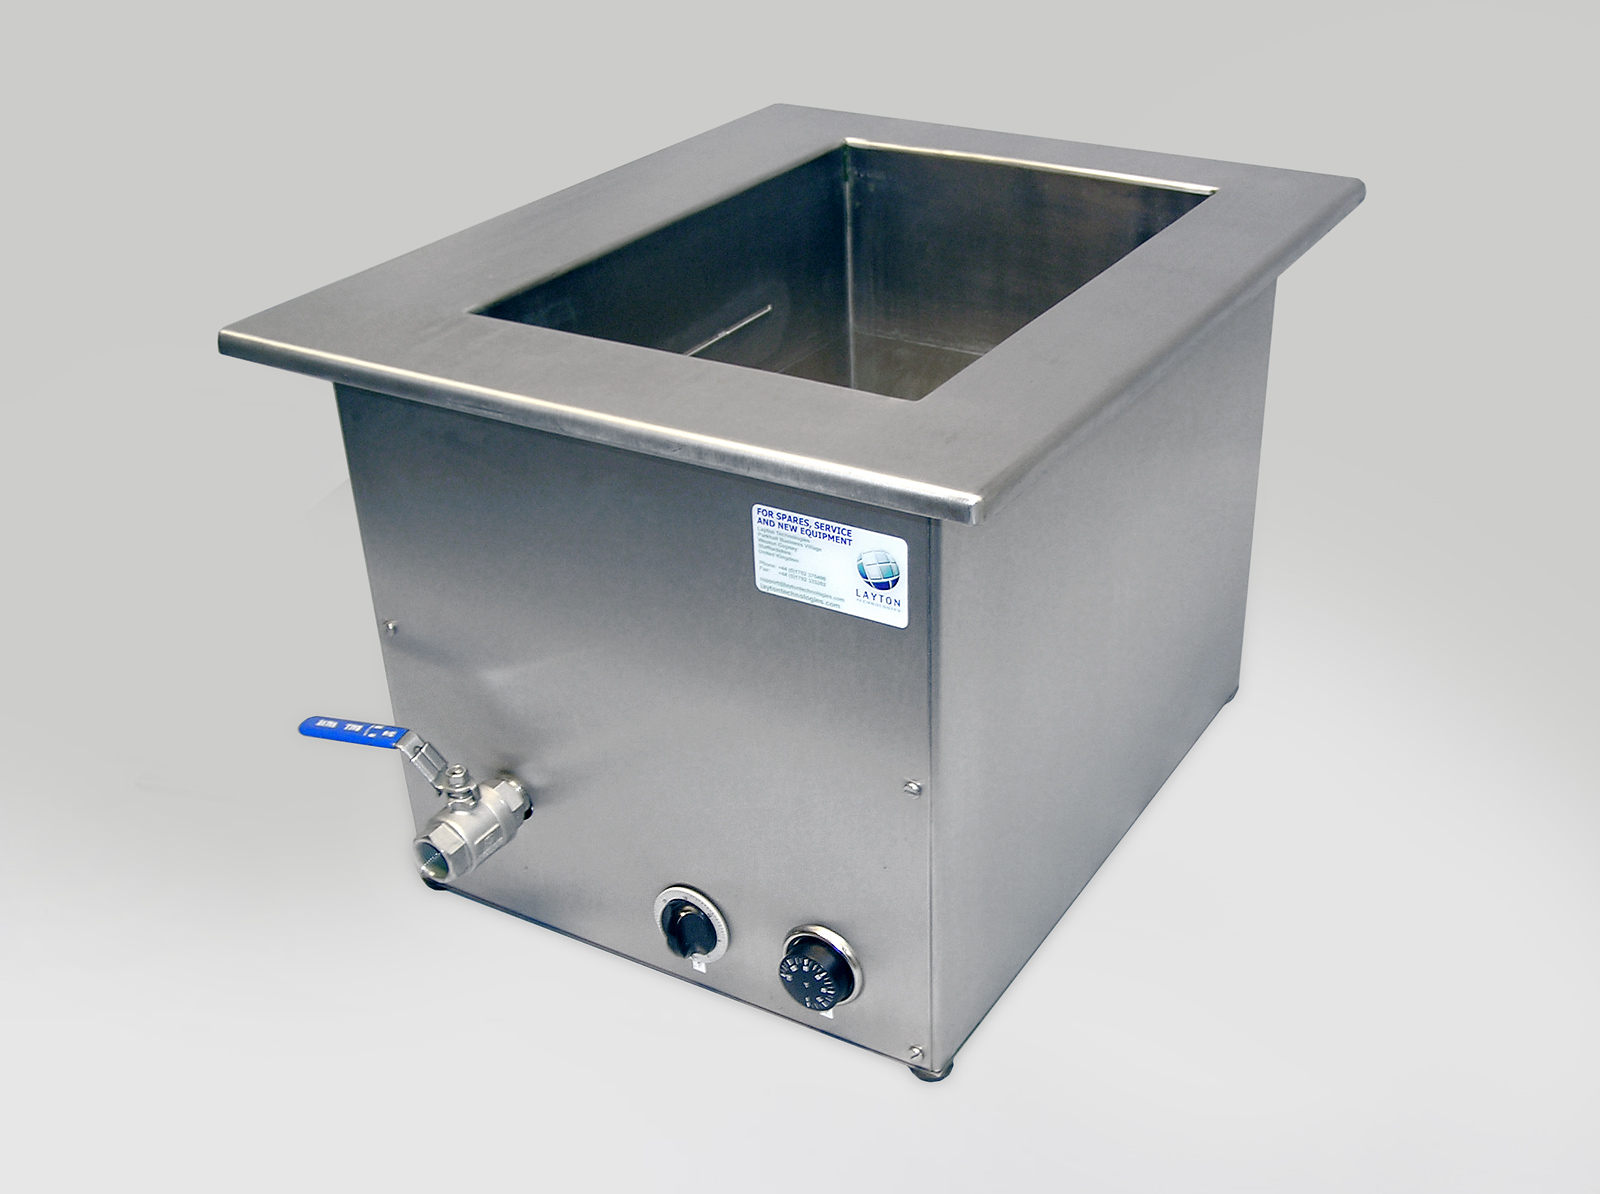 Benchtop Ultrasonic Machine  showing the following:- A Single ultrasonic aqueous cleaning tank with the following features :- 	For use with all aqueous detergents  	All tanks manufactured in Staffordshire.  	All stainless steel construction – traceability certification available.  	Pickled, passivated and electro-polished to extend operational life. 	Heated tank utilising direct contact tube heaters for energy efficiency and longevity.	 	Thermostatically controlled.  	Bolt-in removeable ultrasonic transducer plate.  	Bolt-in ultrasonic transducers ensure minimal downtime and extend tank life.  	Multi-frequency ultrasonic transducers.  All ultrasonics use sweep frequency technology.    	Separate ultrasonic generator.  	Industrial standard – continually rated.  	Insulated frame.  	Basket and lid inclusive.  	Table top or bench inset mounted.  	Operates from standard mains voltage.  	CE Certified – UL approval also available.